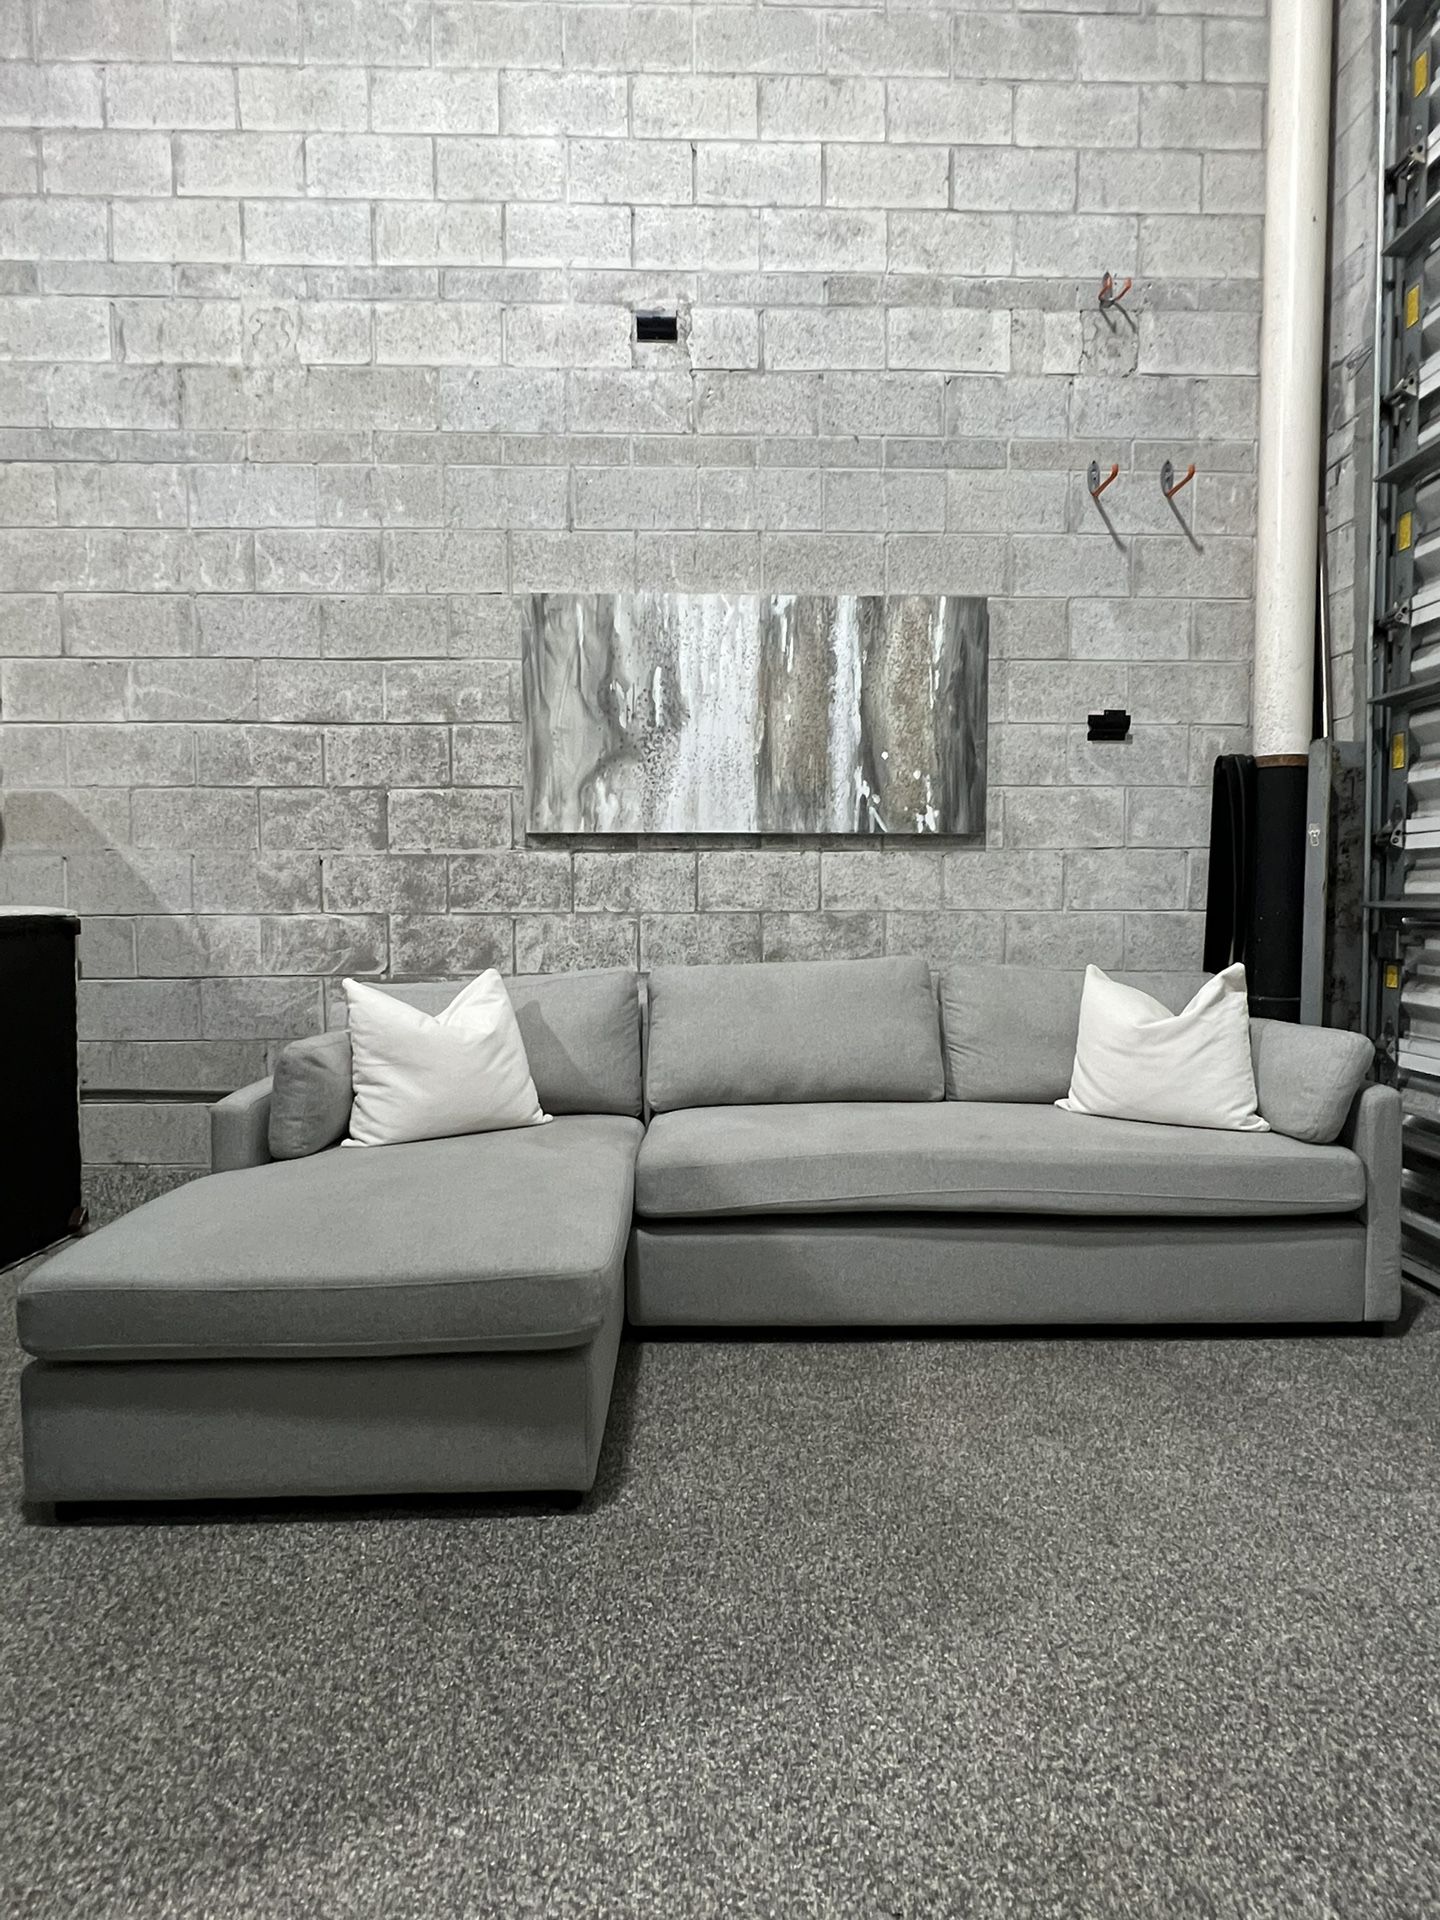 Gray Left Chaise Sectional (Free Delivery)